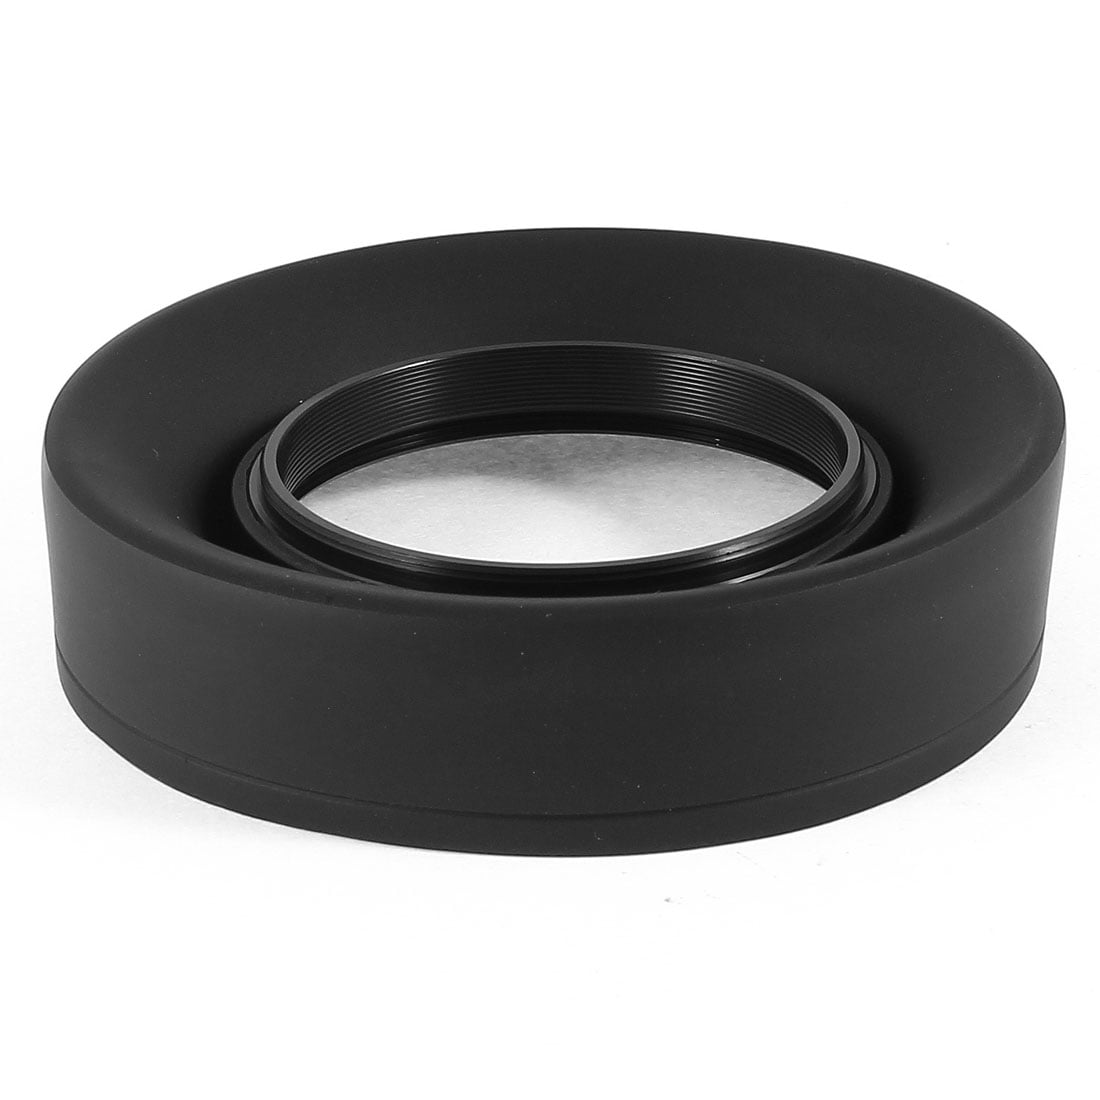 67mm 3-Stage Collapsible Rubber Hood for lens with 67mm screw thread UK SELLER!! 